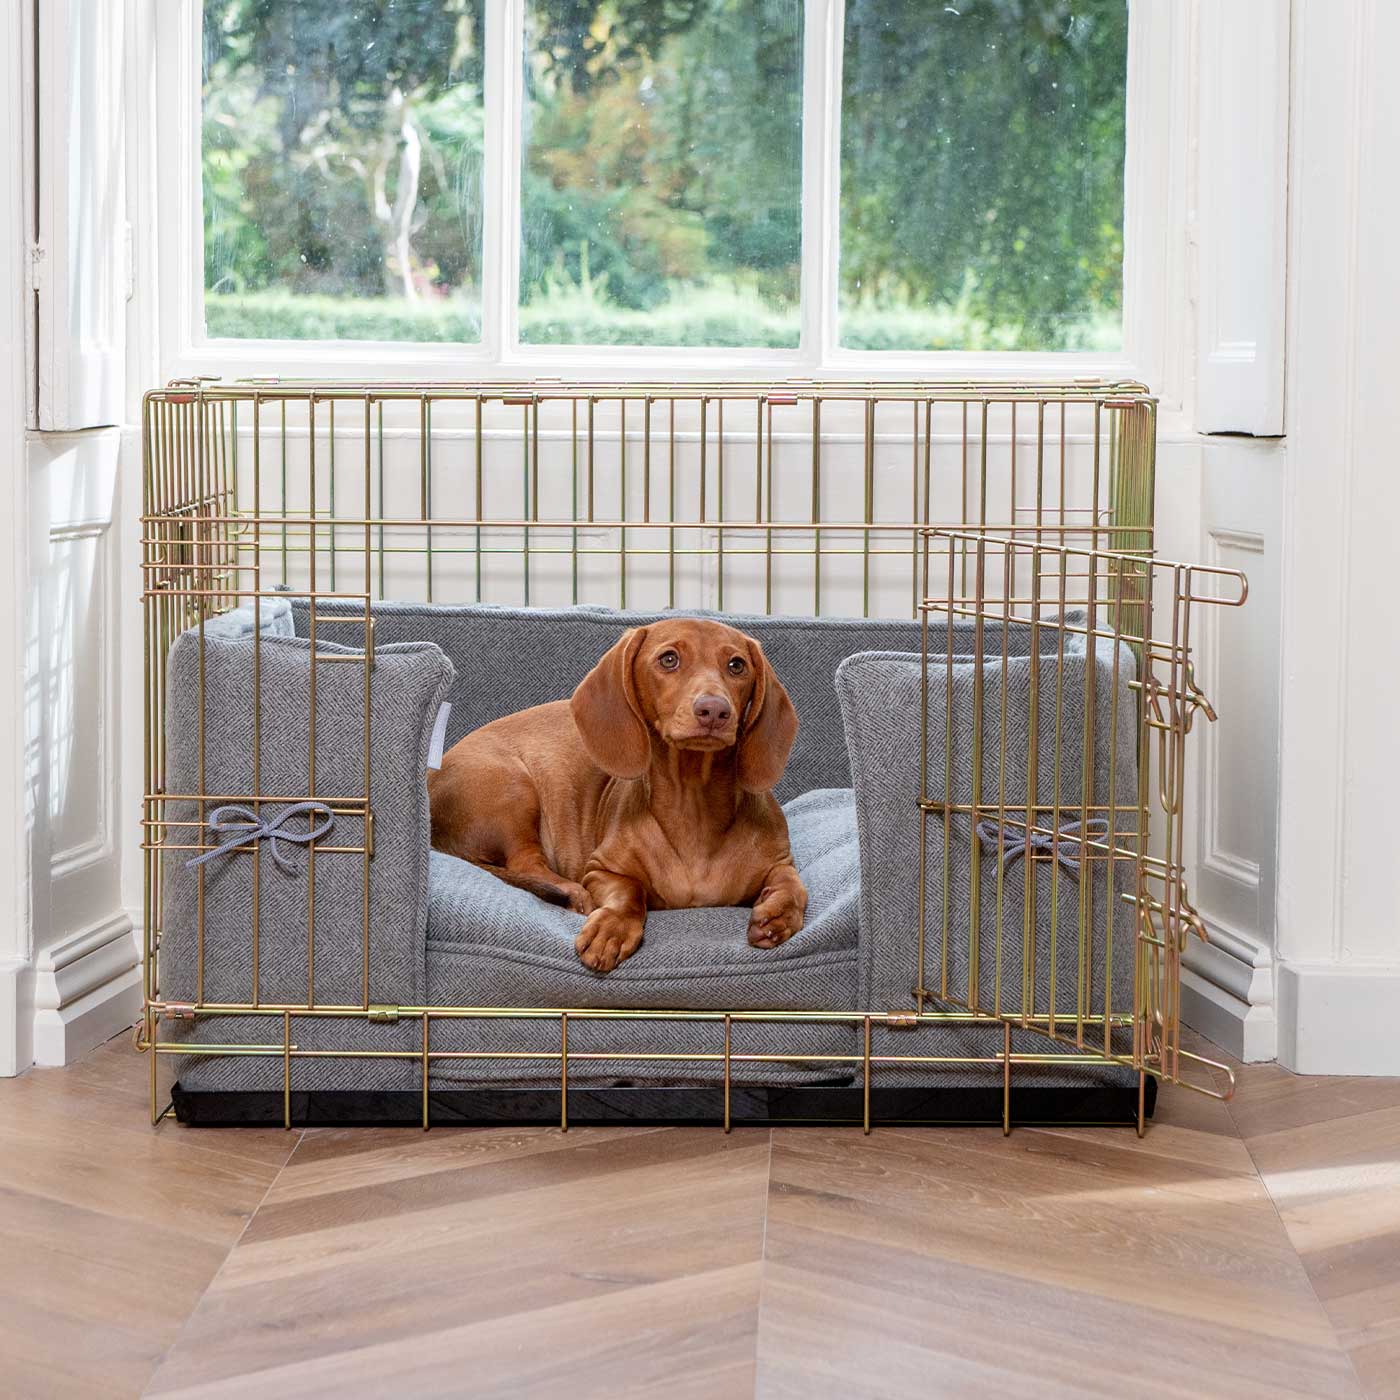 Discover our Luxury Dog Crate Bumper, in Pewter Herringbone. The Perfect Dog Crate Accessory, Available To Personalise Now at Lords & Labradors